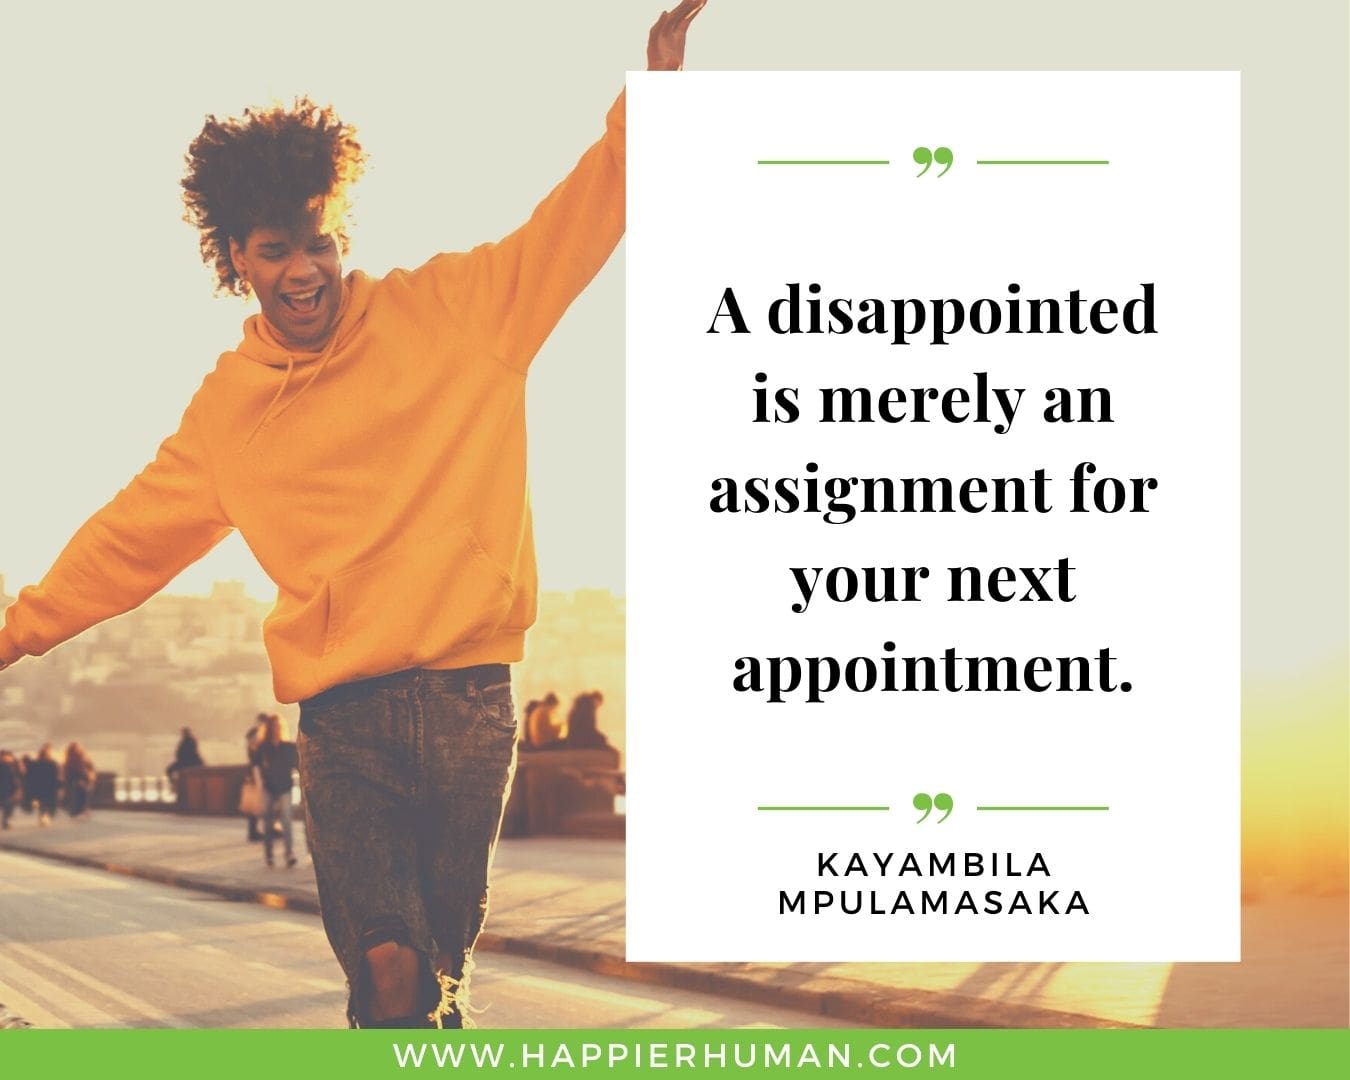 Positive Energy Quotes - “A disappointed is merely an assignment for your next appointment.” - Kayambila Mpulamasaka